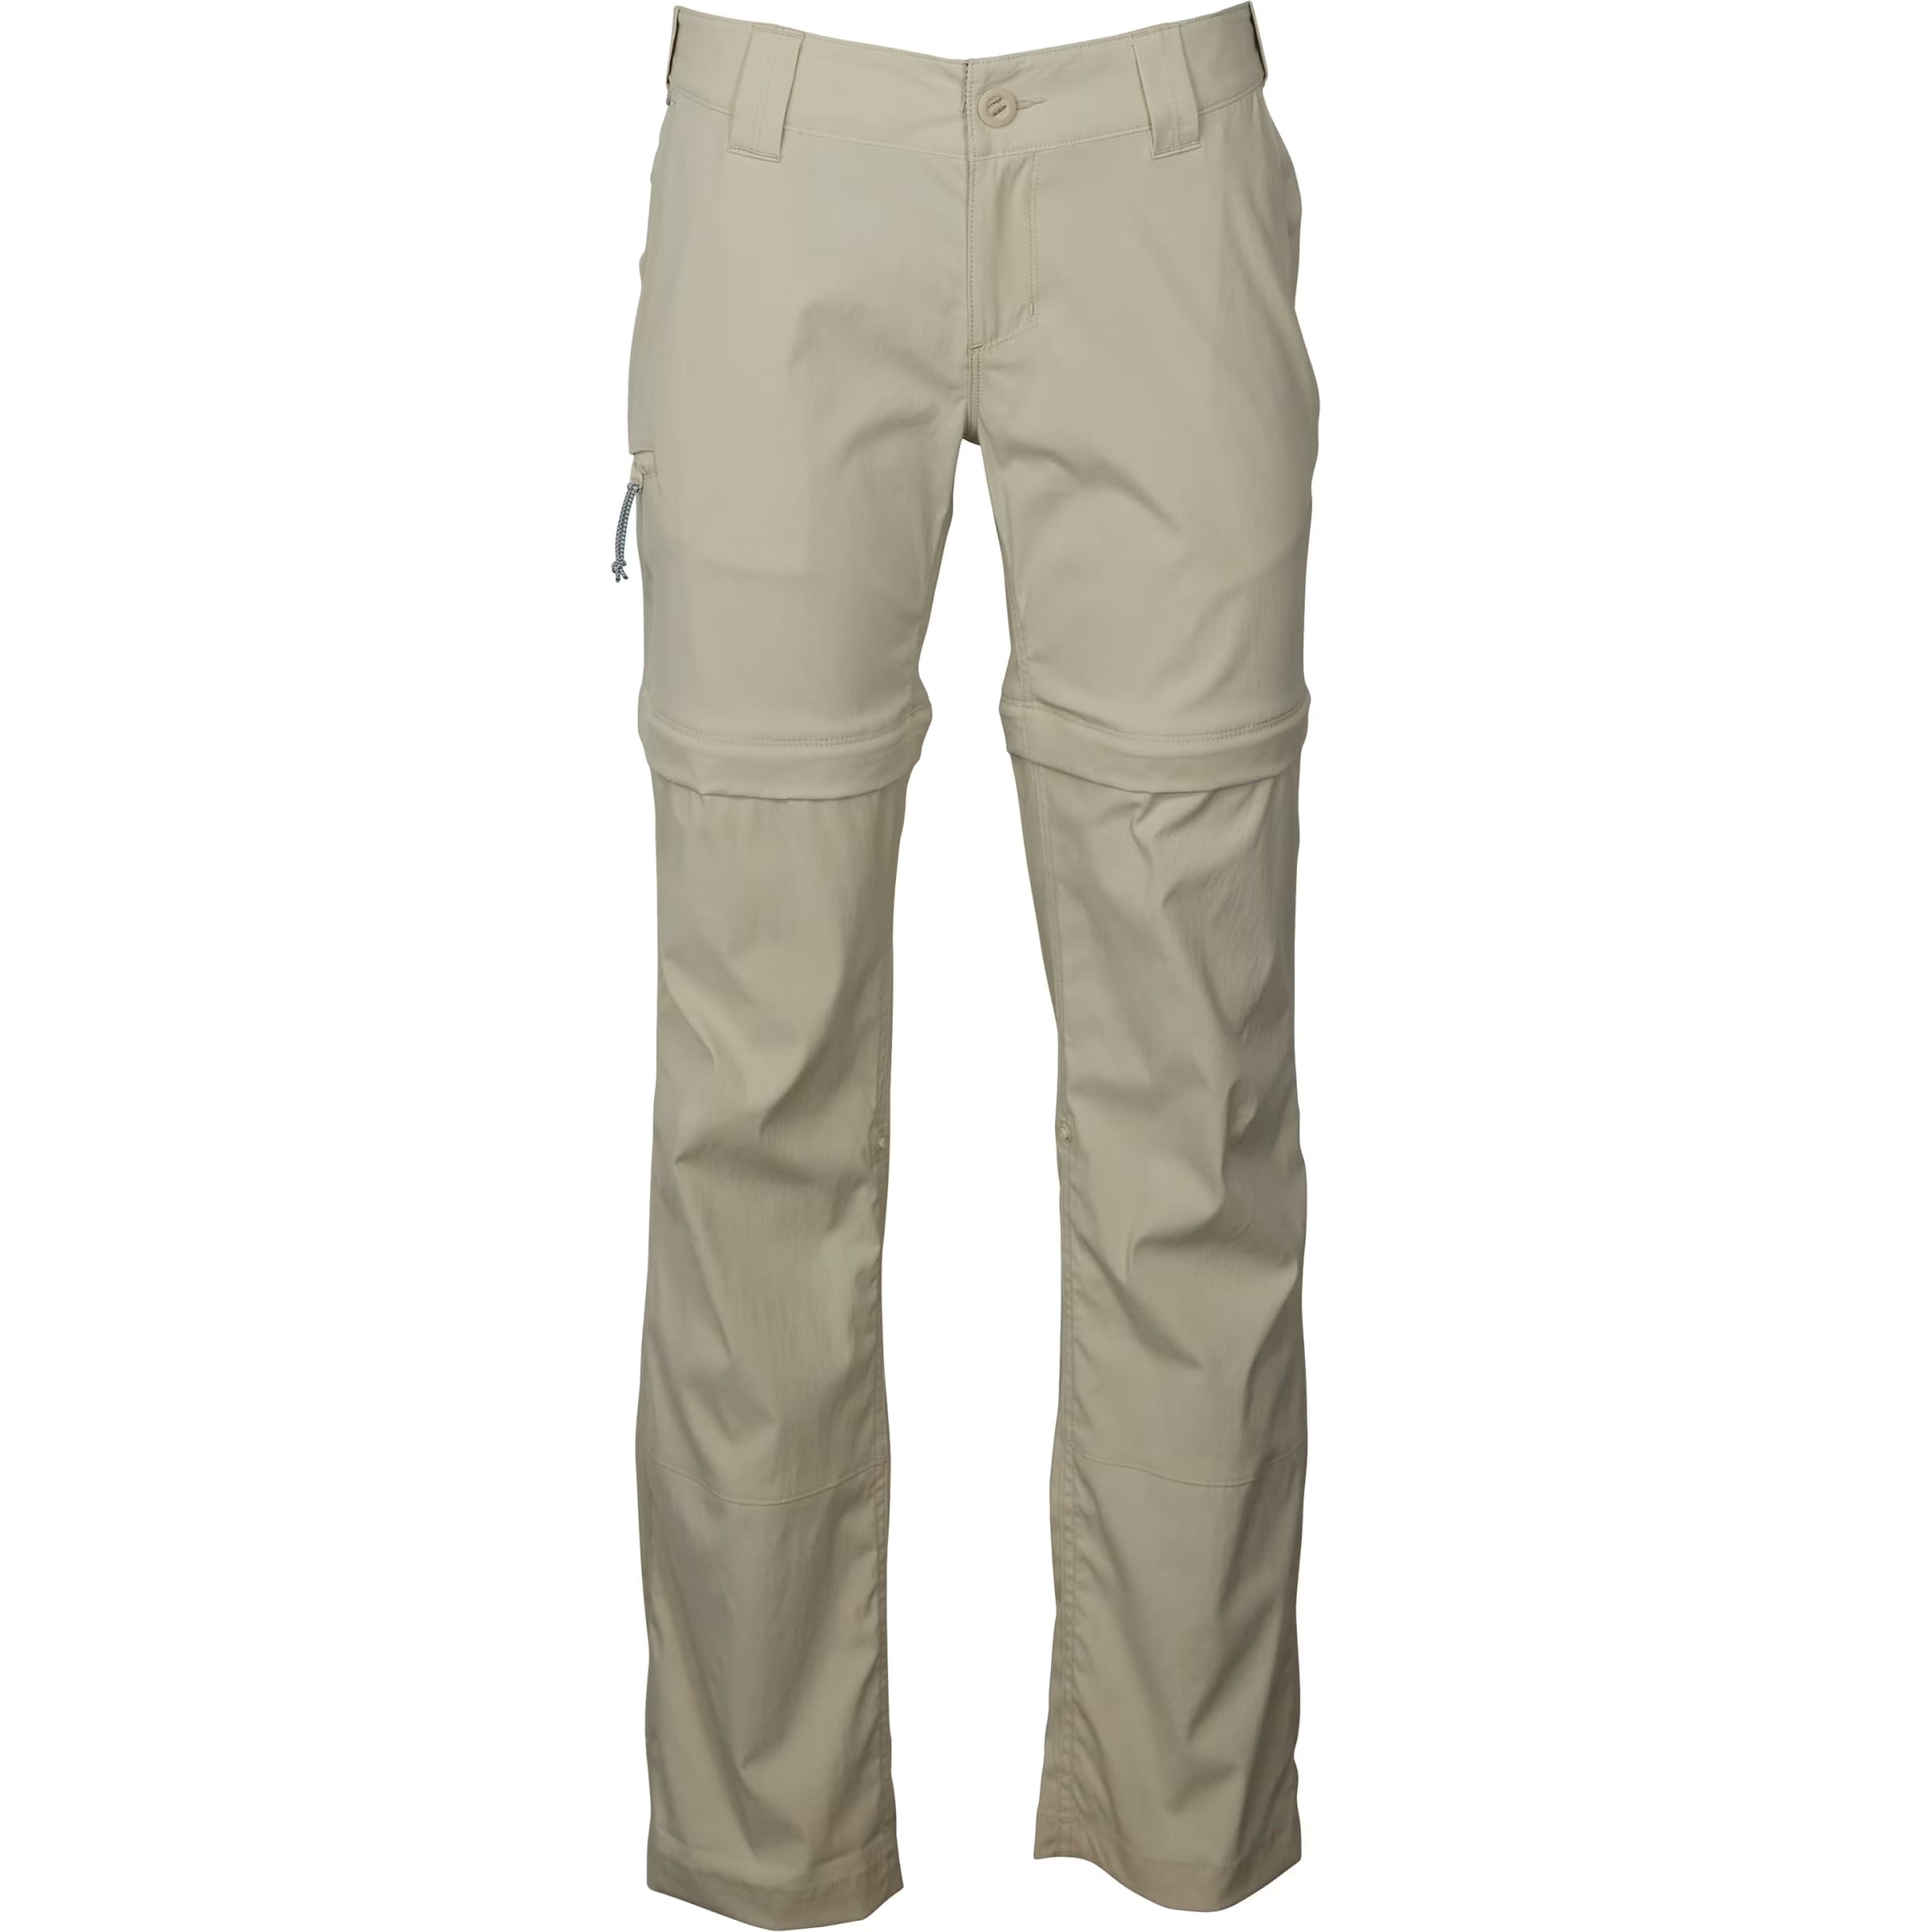 This exact carhartt style pants for women? : r/findfashion